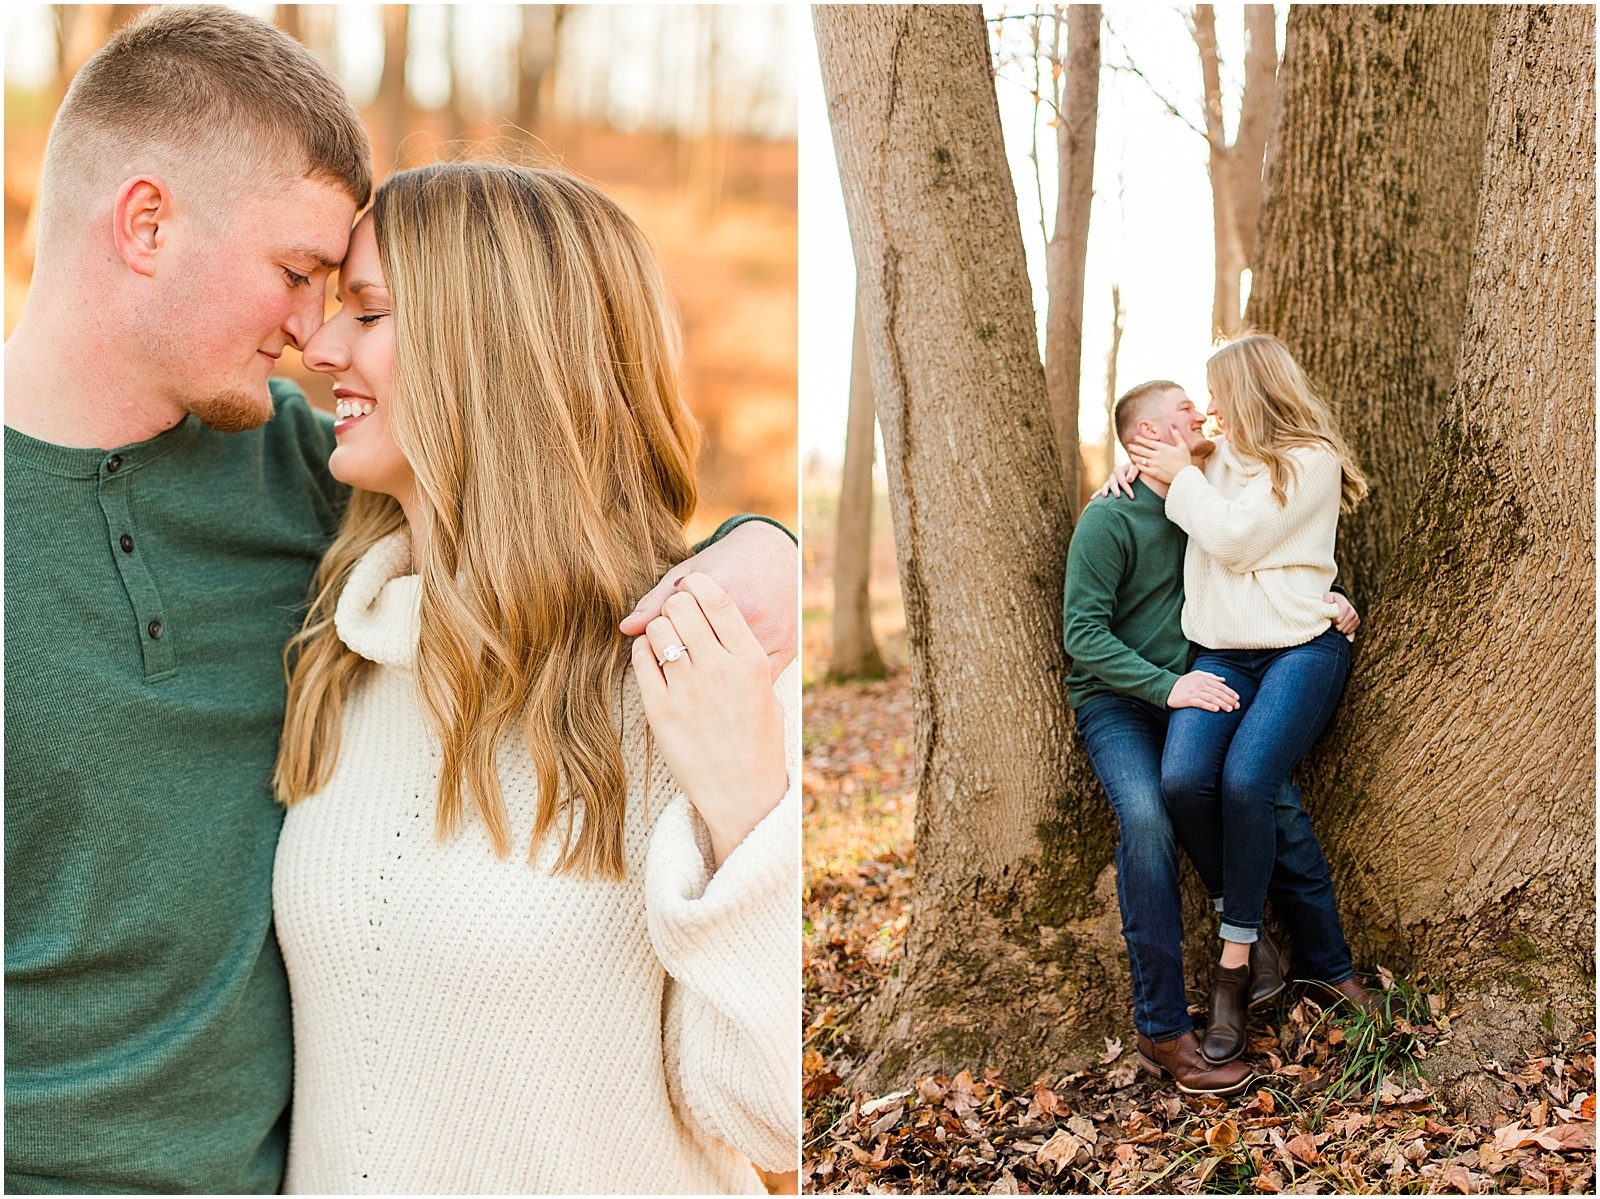 The Best of Engagement Sessions 2020 Recap0004.jpg